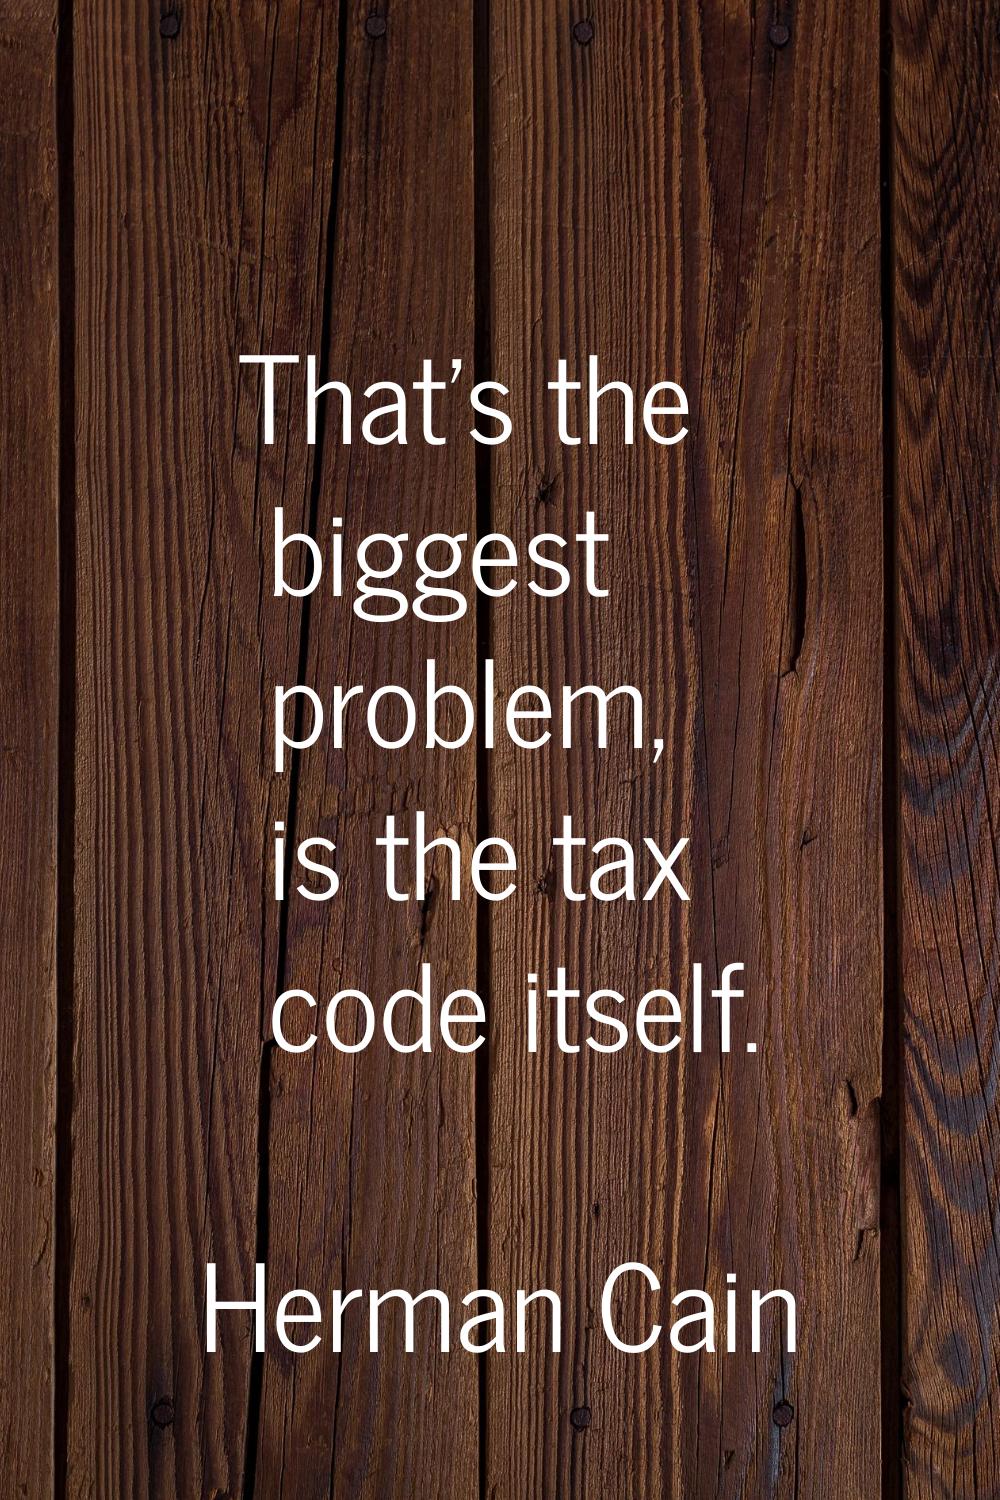 That's the biggest problem, is the tax code itself.